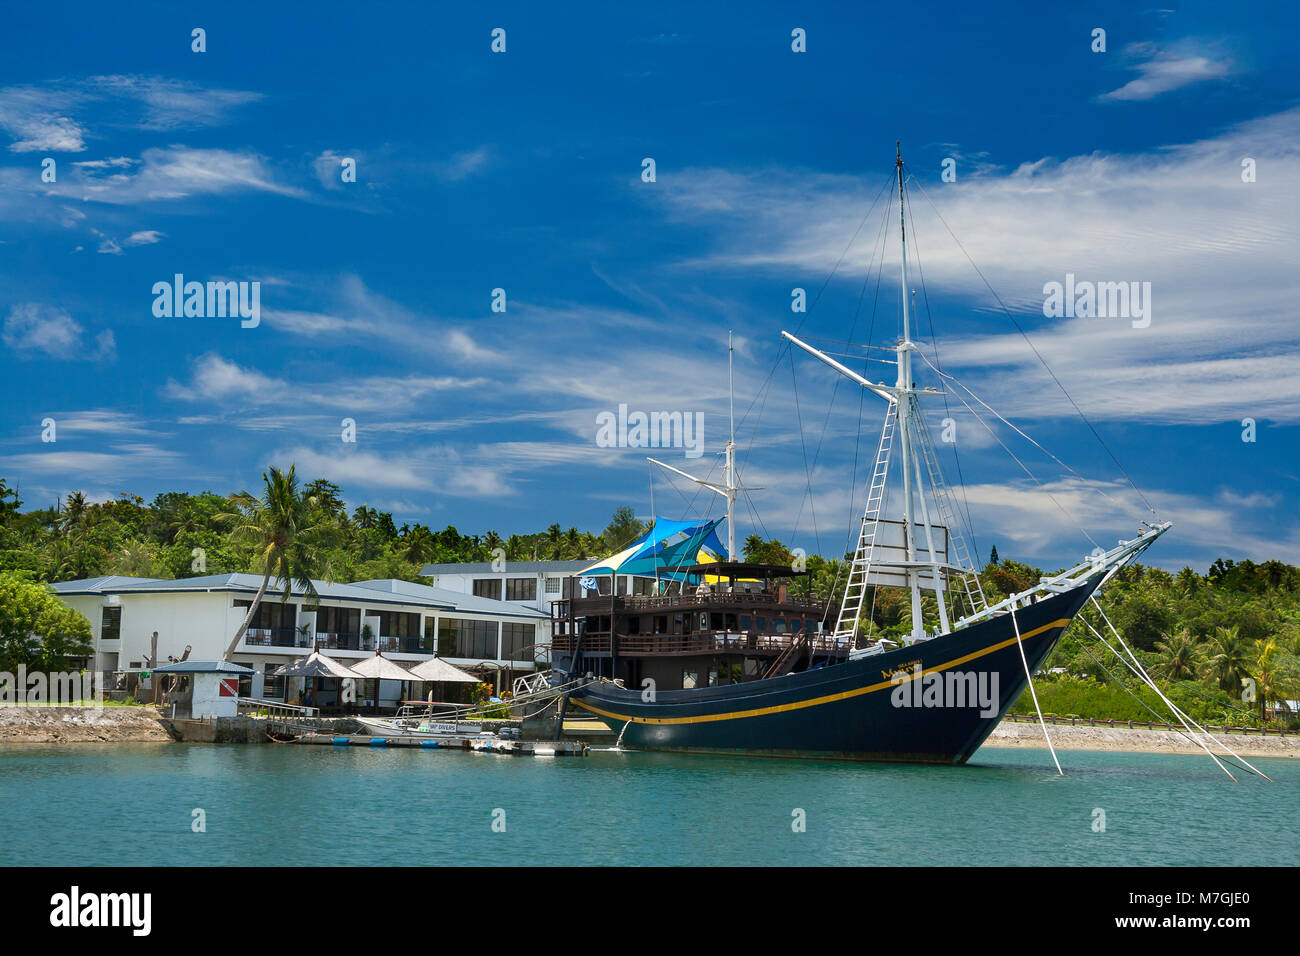 A view from the water of the Manta Ray Bay Resort and it's floating restaurant 'The Mnuw' on the island of Yap, Micronesia. Stock Photo